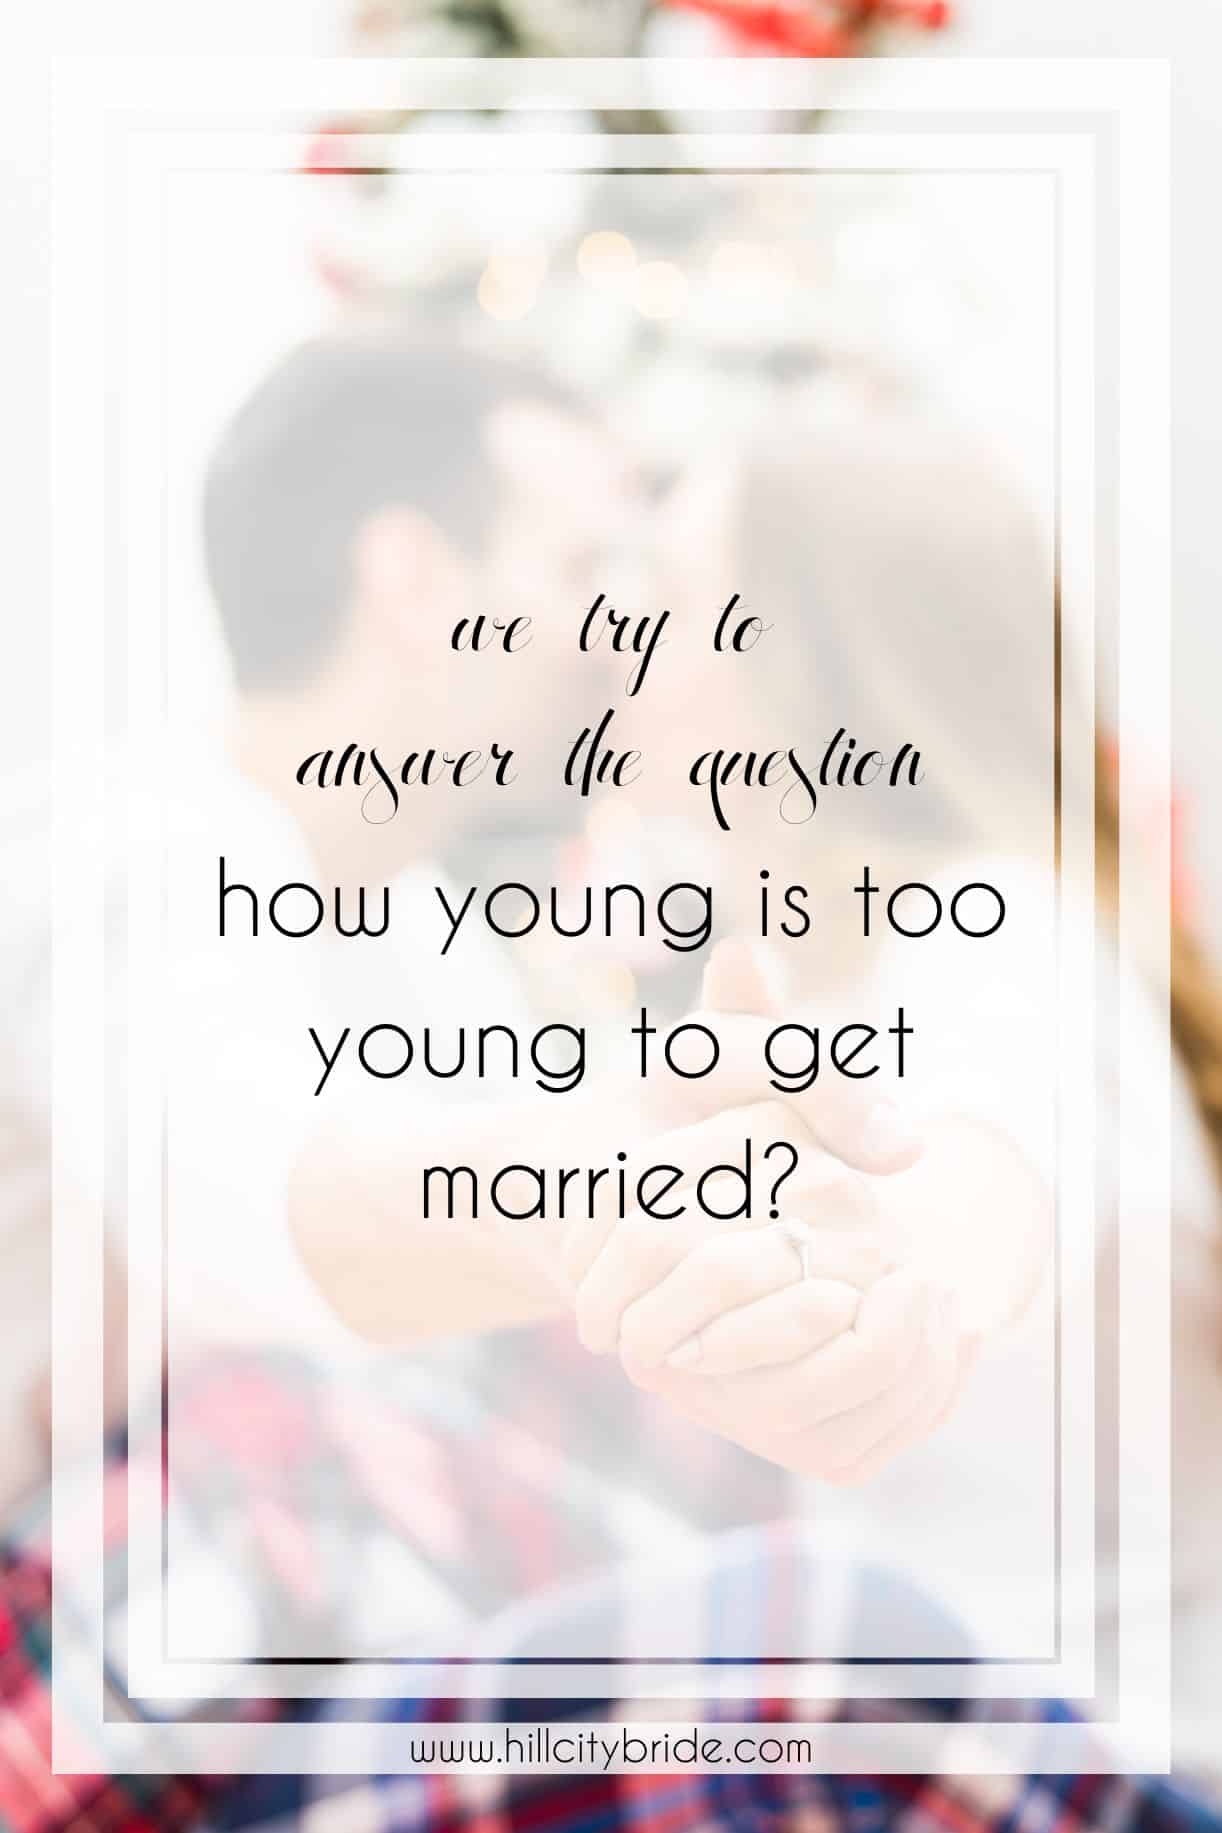 How Young Is Too Young to Get Married?